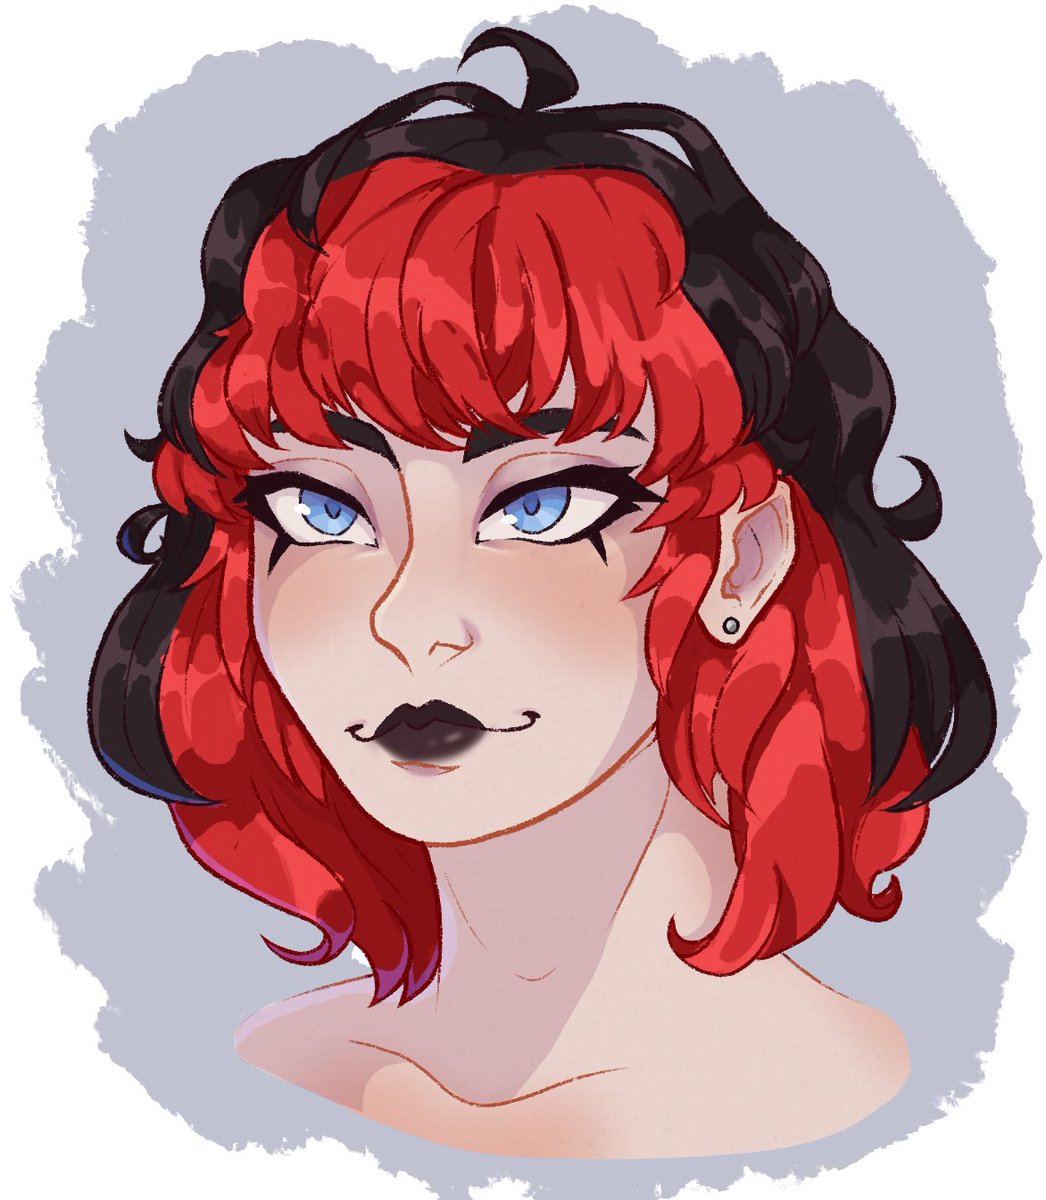 I drew myself in the style of The Arcana! I think the hair shading could have been done better but it was fun to make!
 #TheArcana #TheArcanaGame #dorianlive